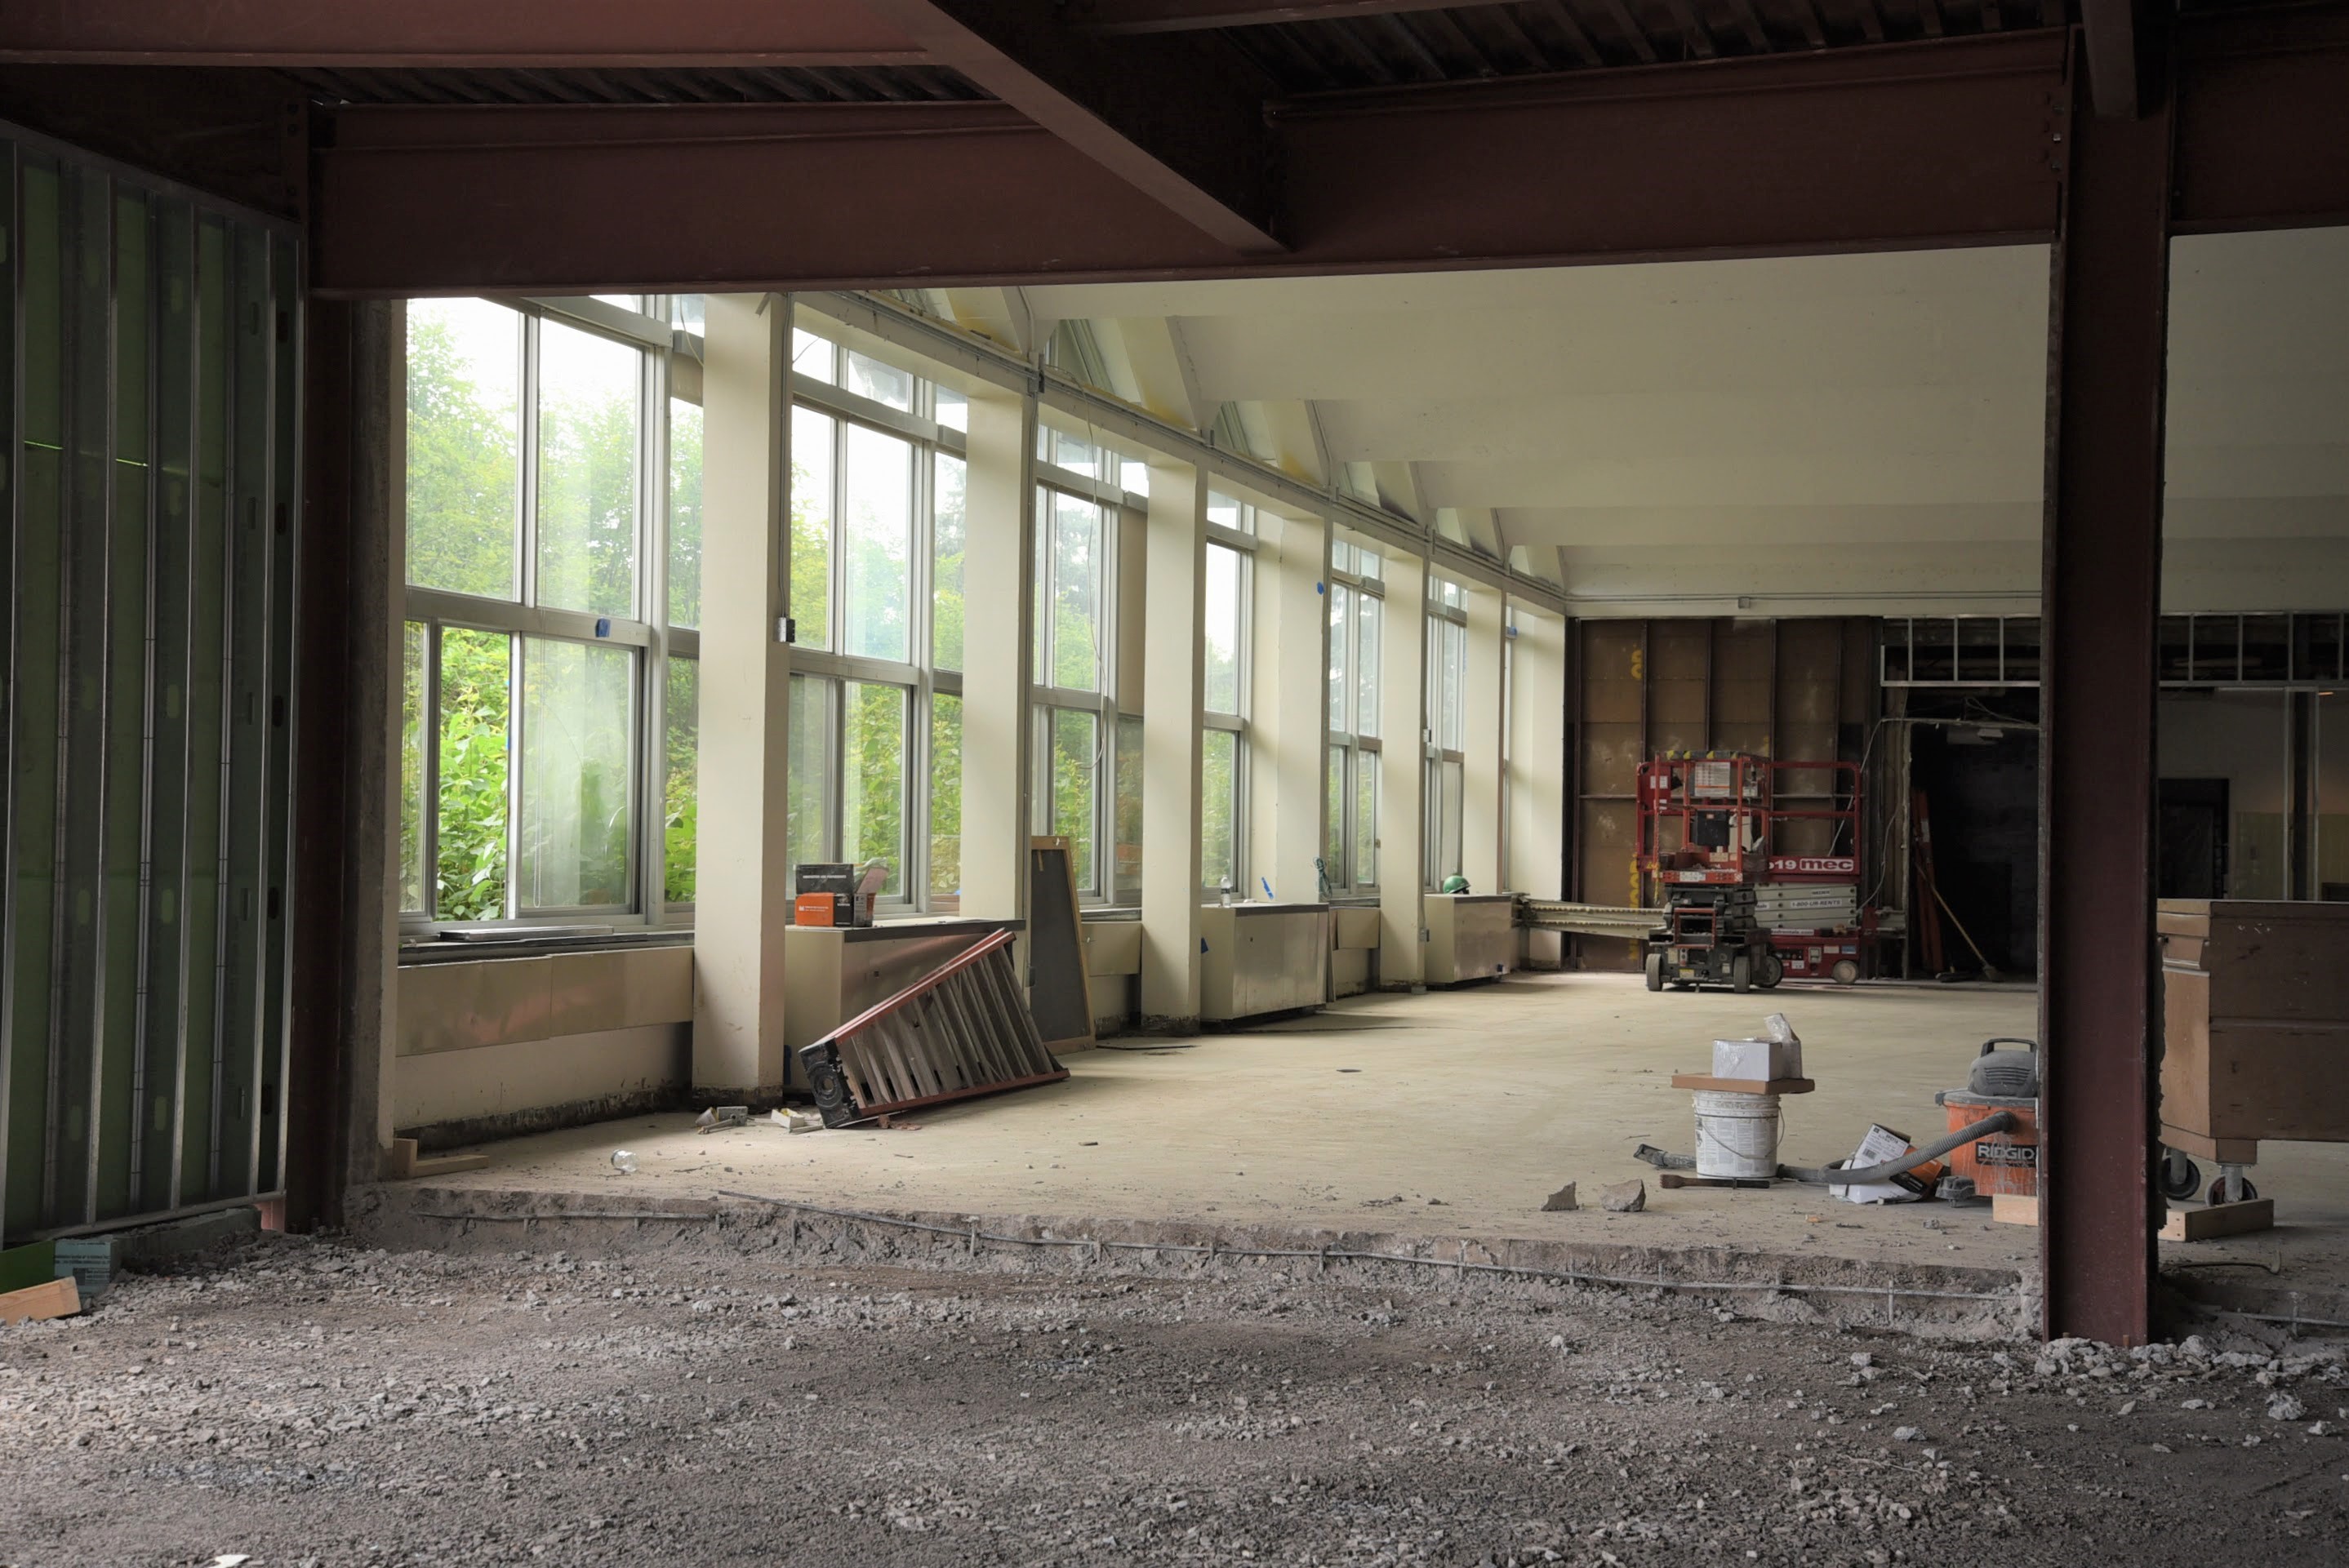 Dining Center during construction (focus on windows)